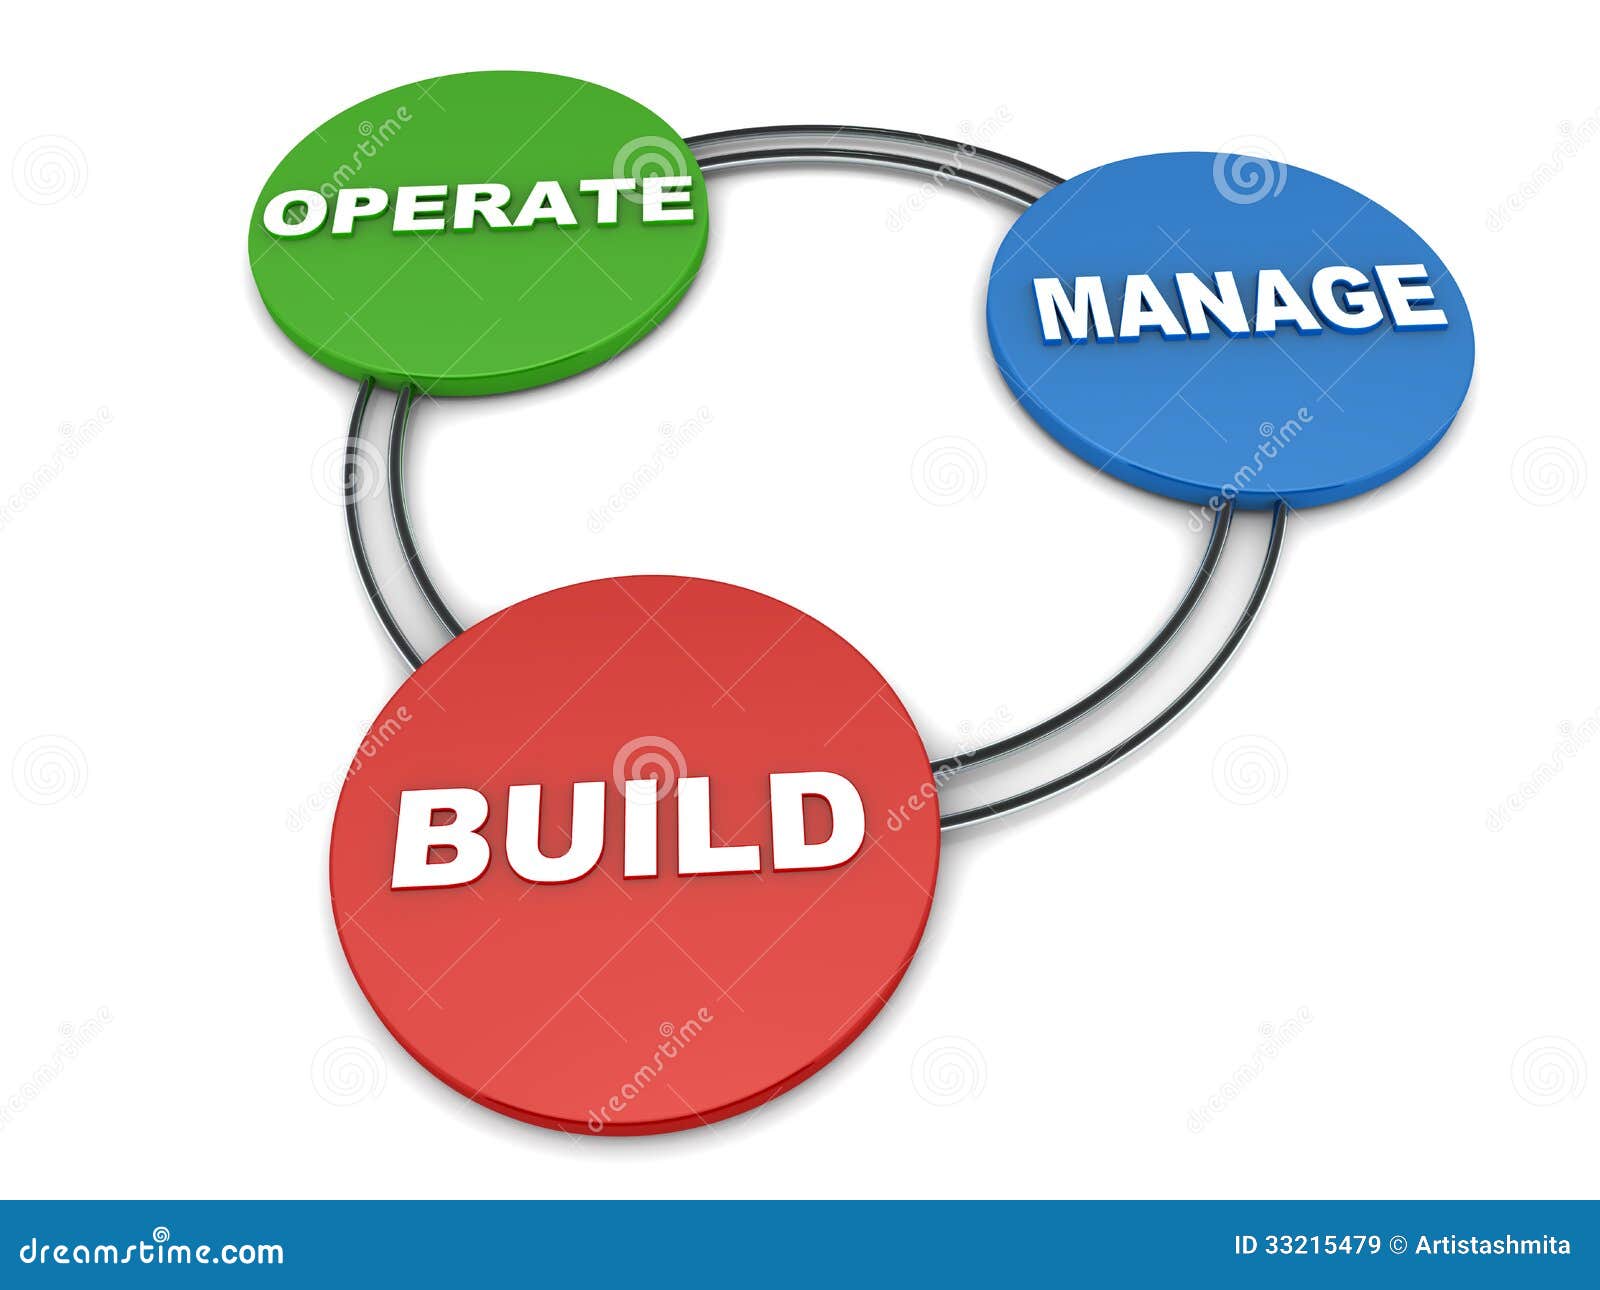 build operate and manage model